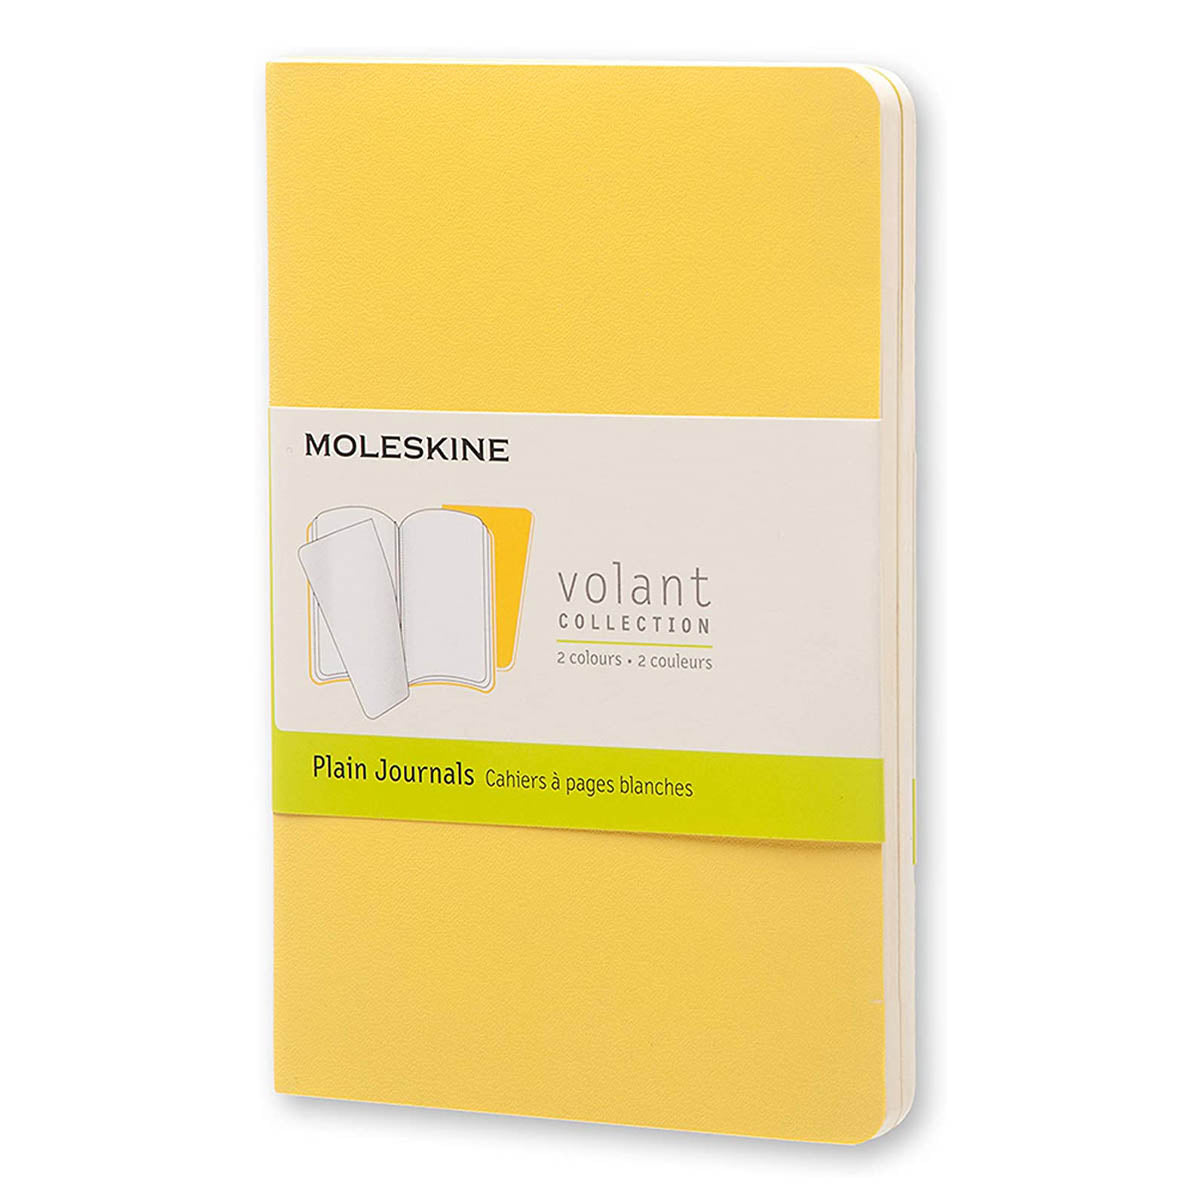 Moleskine Volant Set 2 Cahiers Pages Blanches Jaune